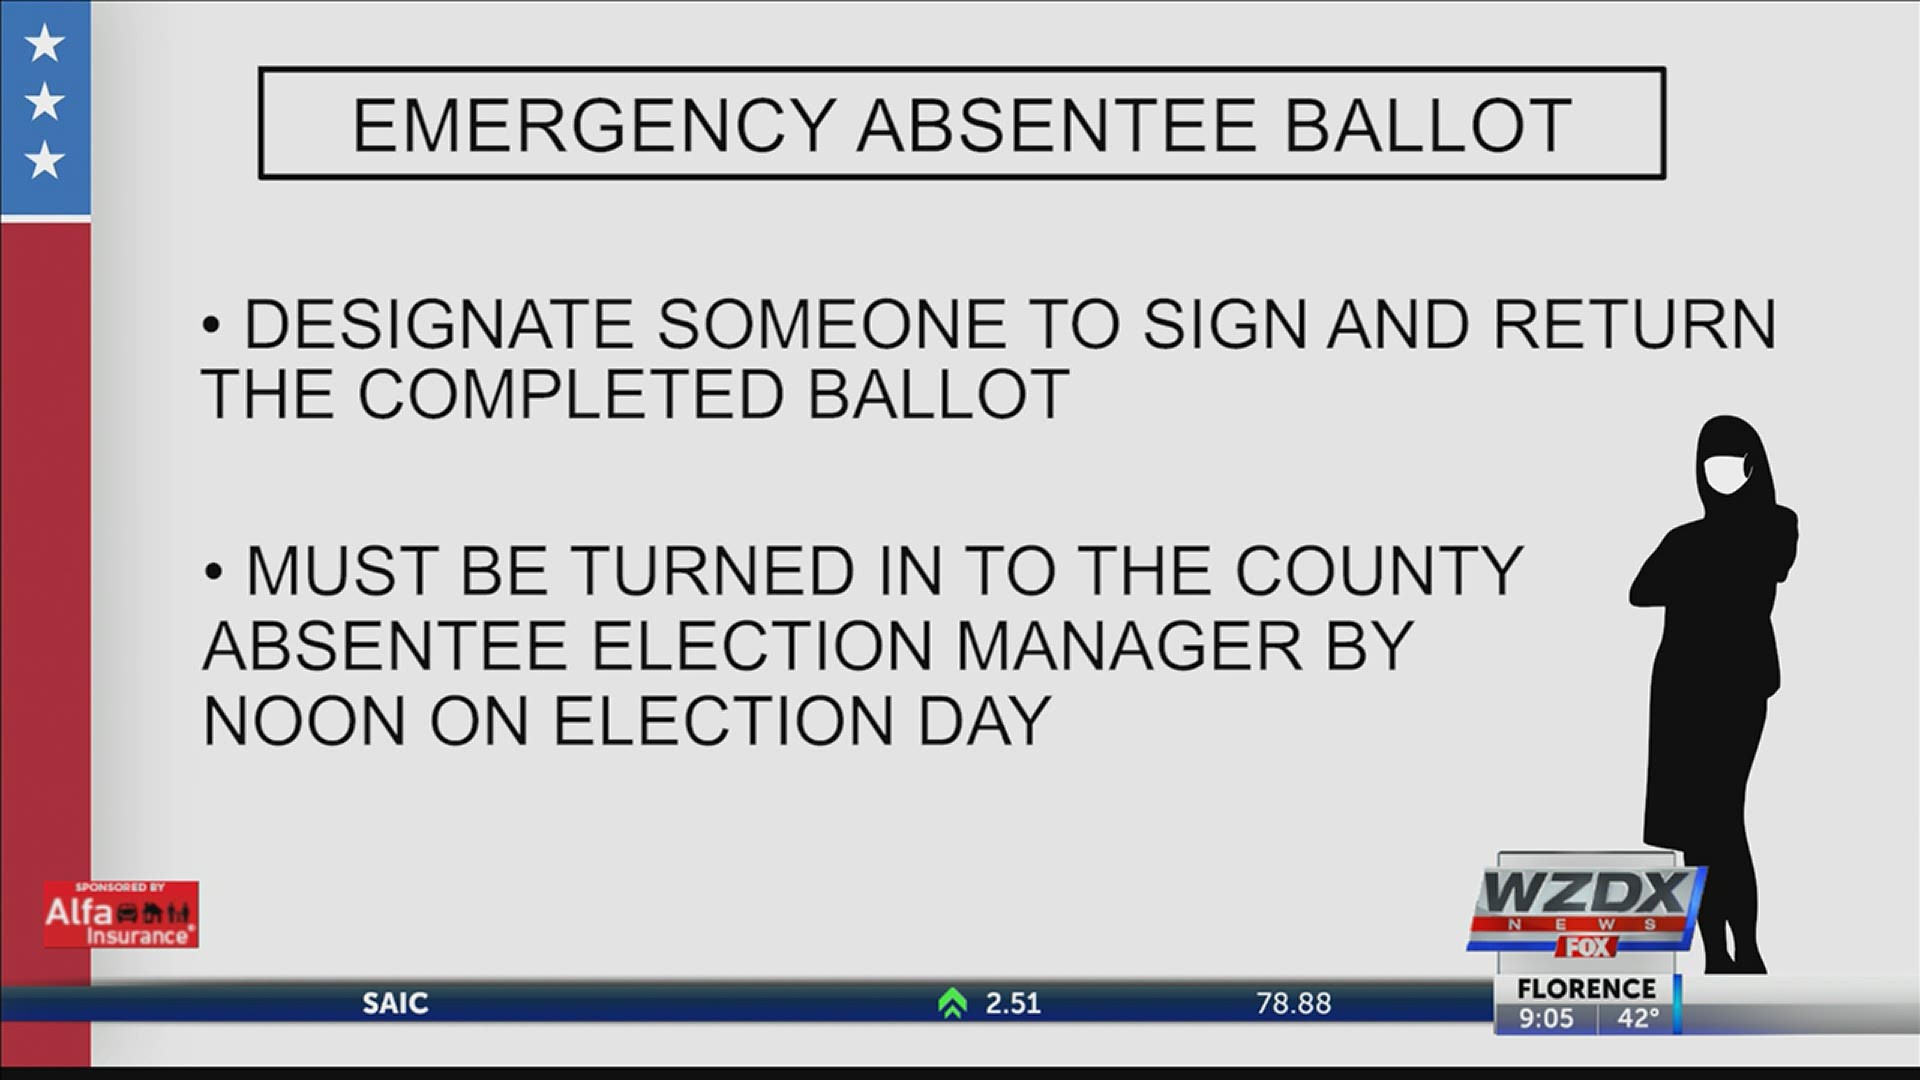 On Friday, Alabama Attorney General Steve Marshall announced COVID-19 positive voters can apply for an emergency absentee ballot.